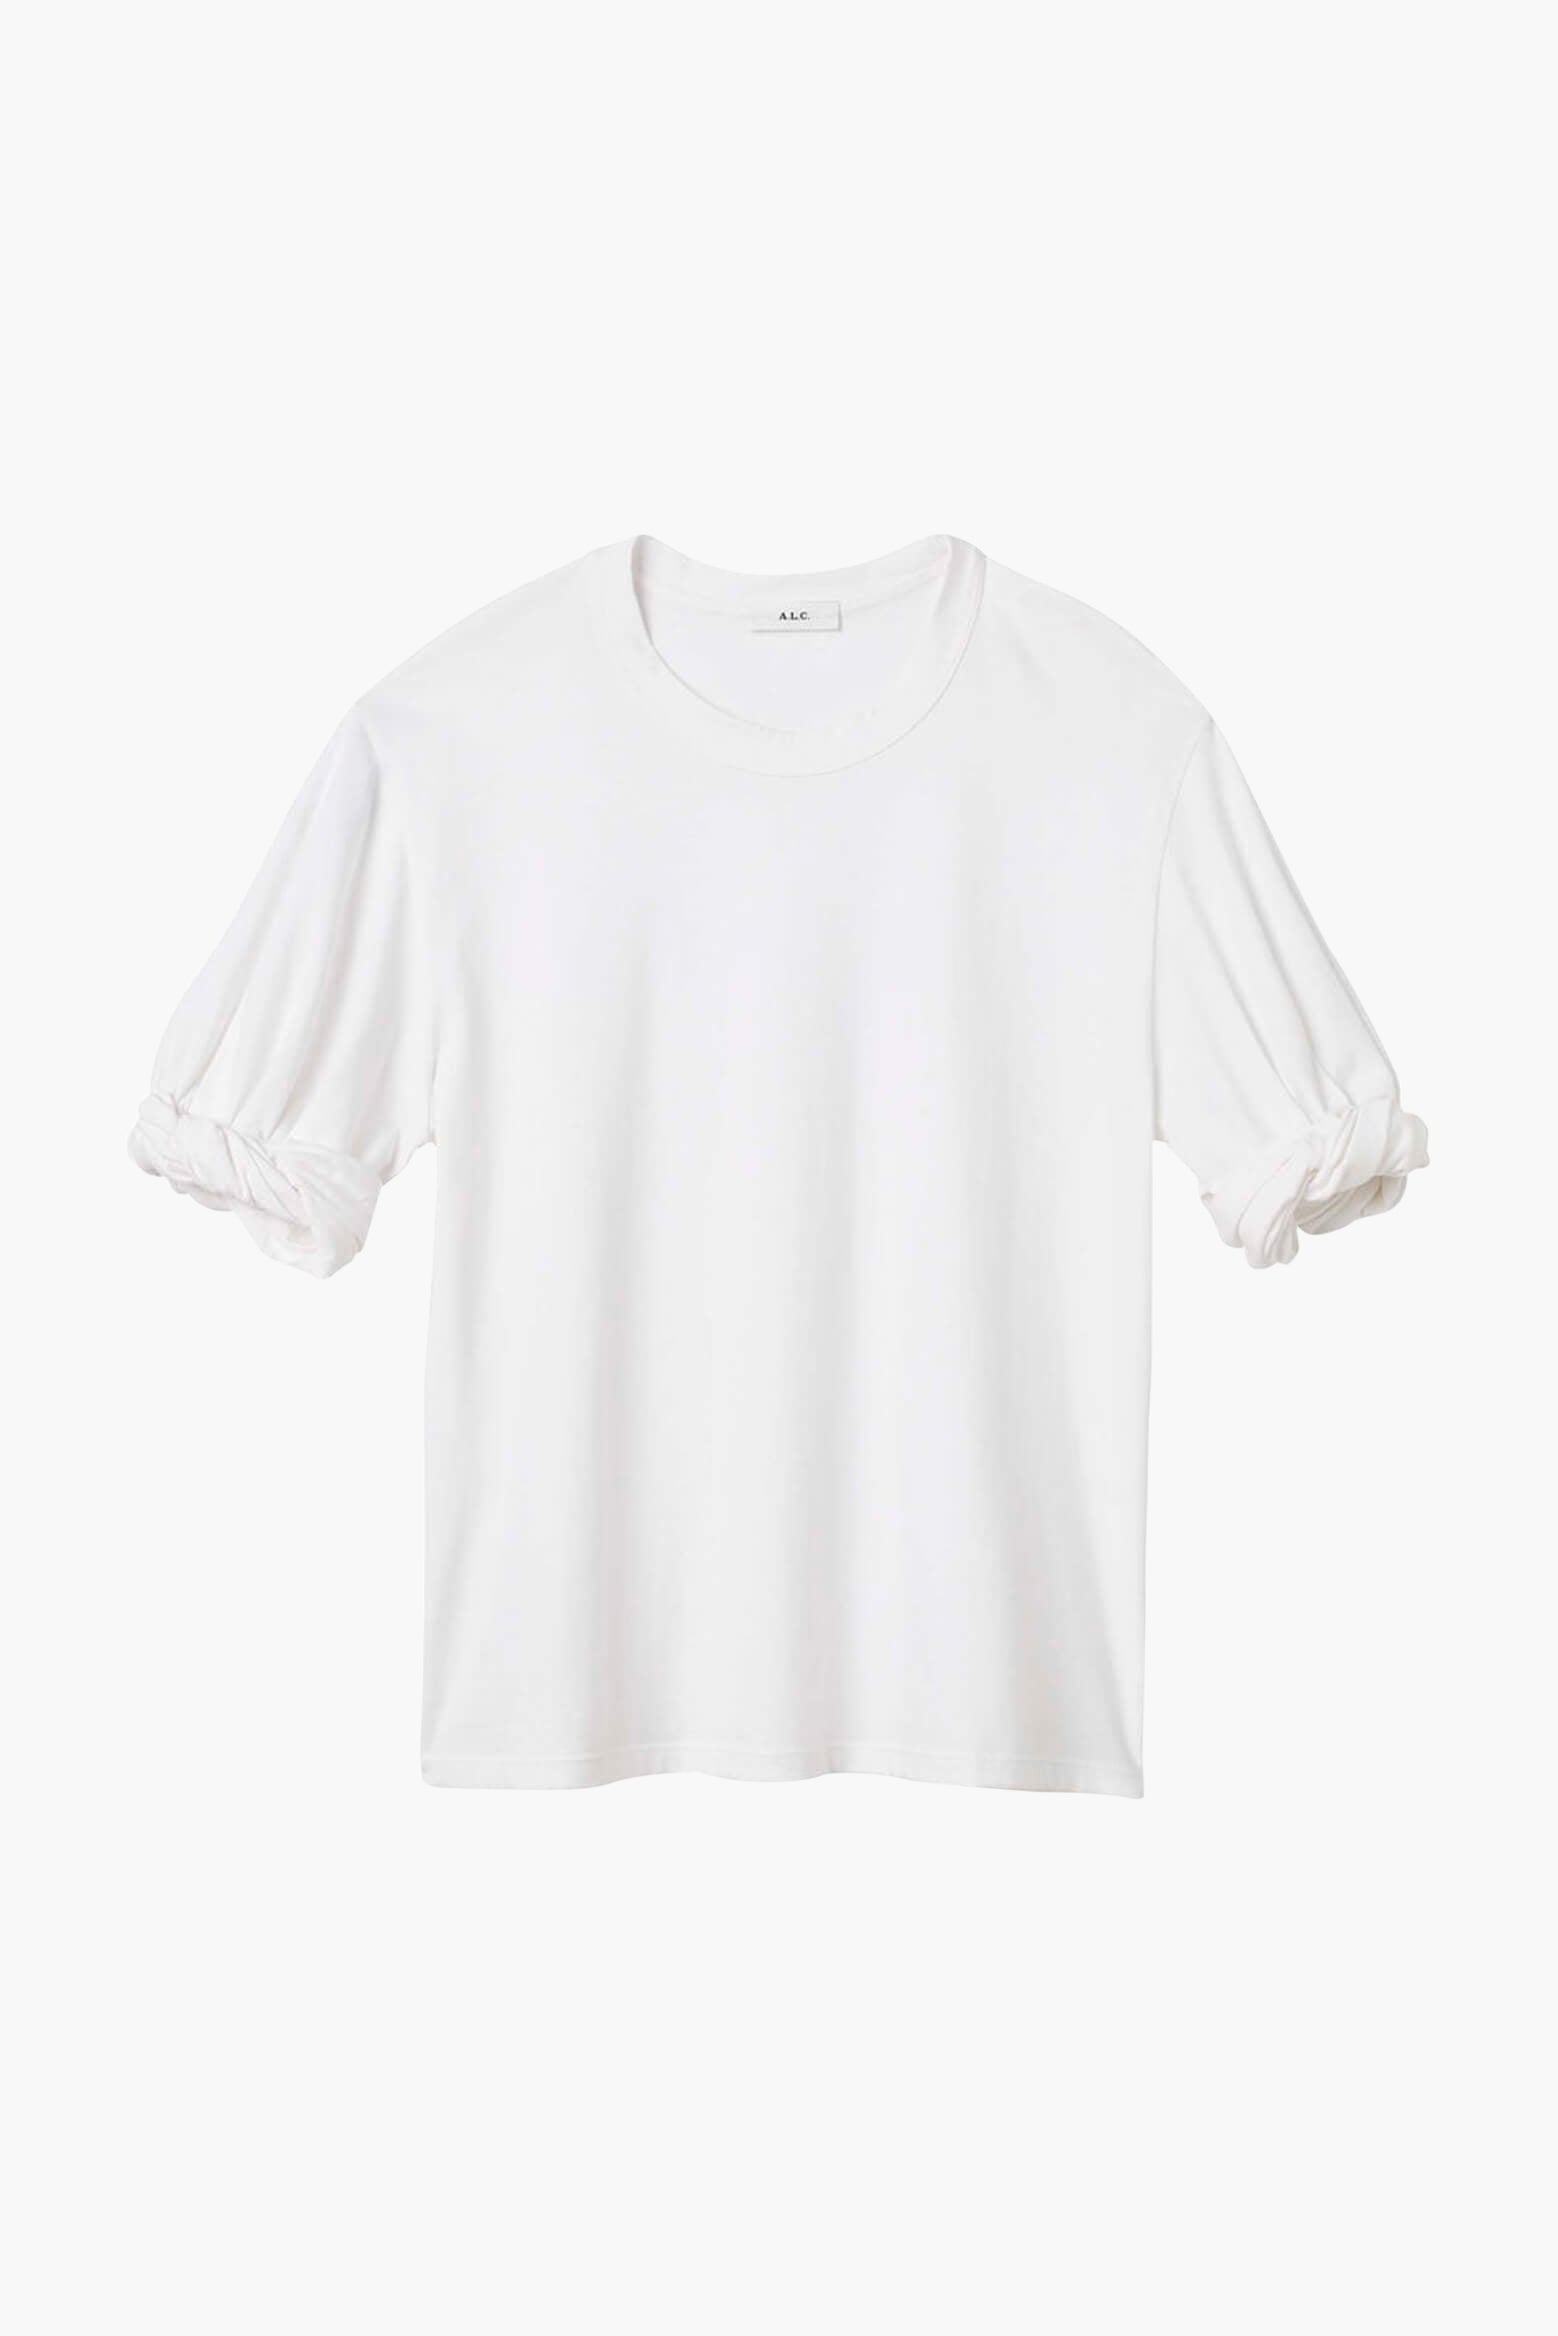 ALC Wells Cotton Jersey Tee in White available at TNT The New Trend Australia.